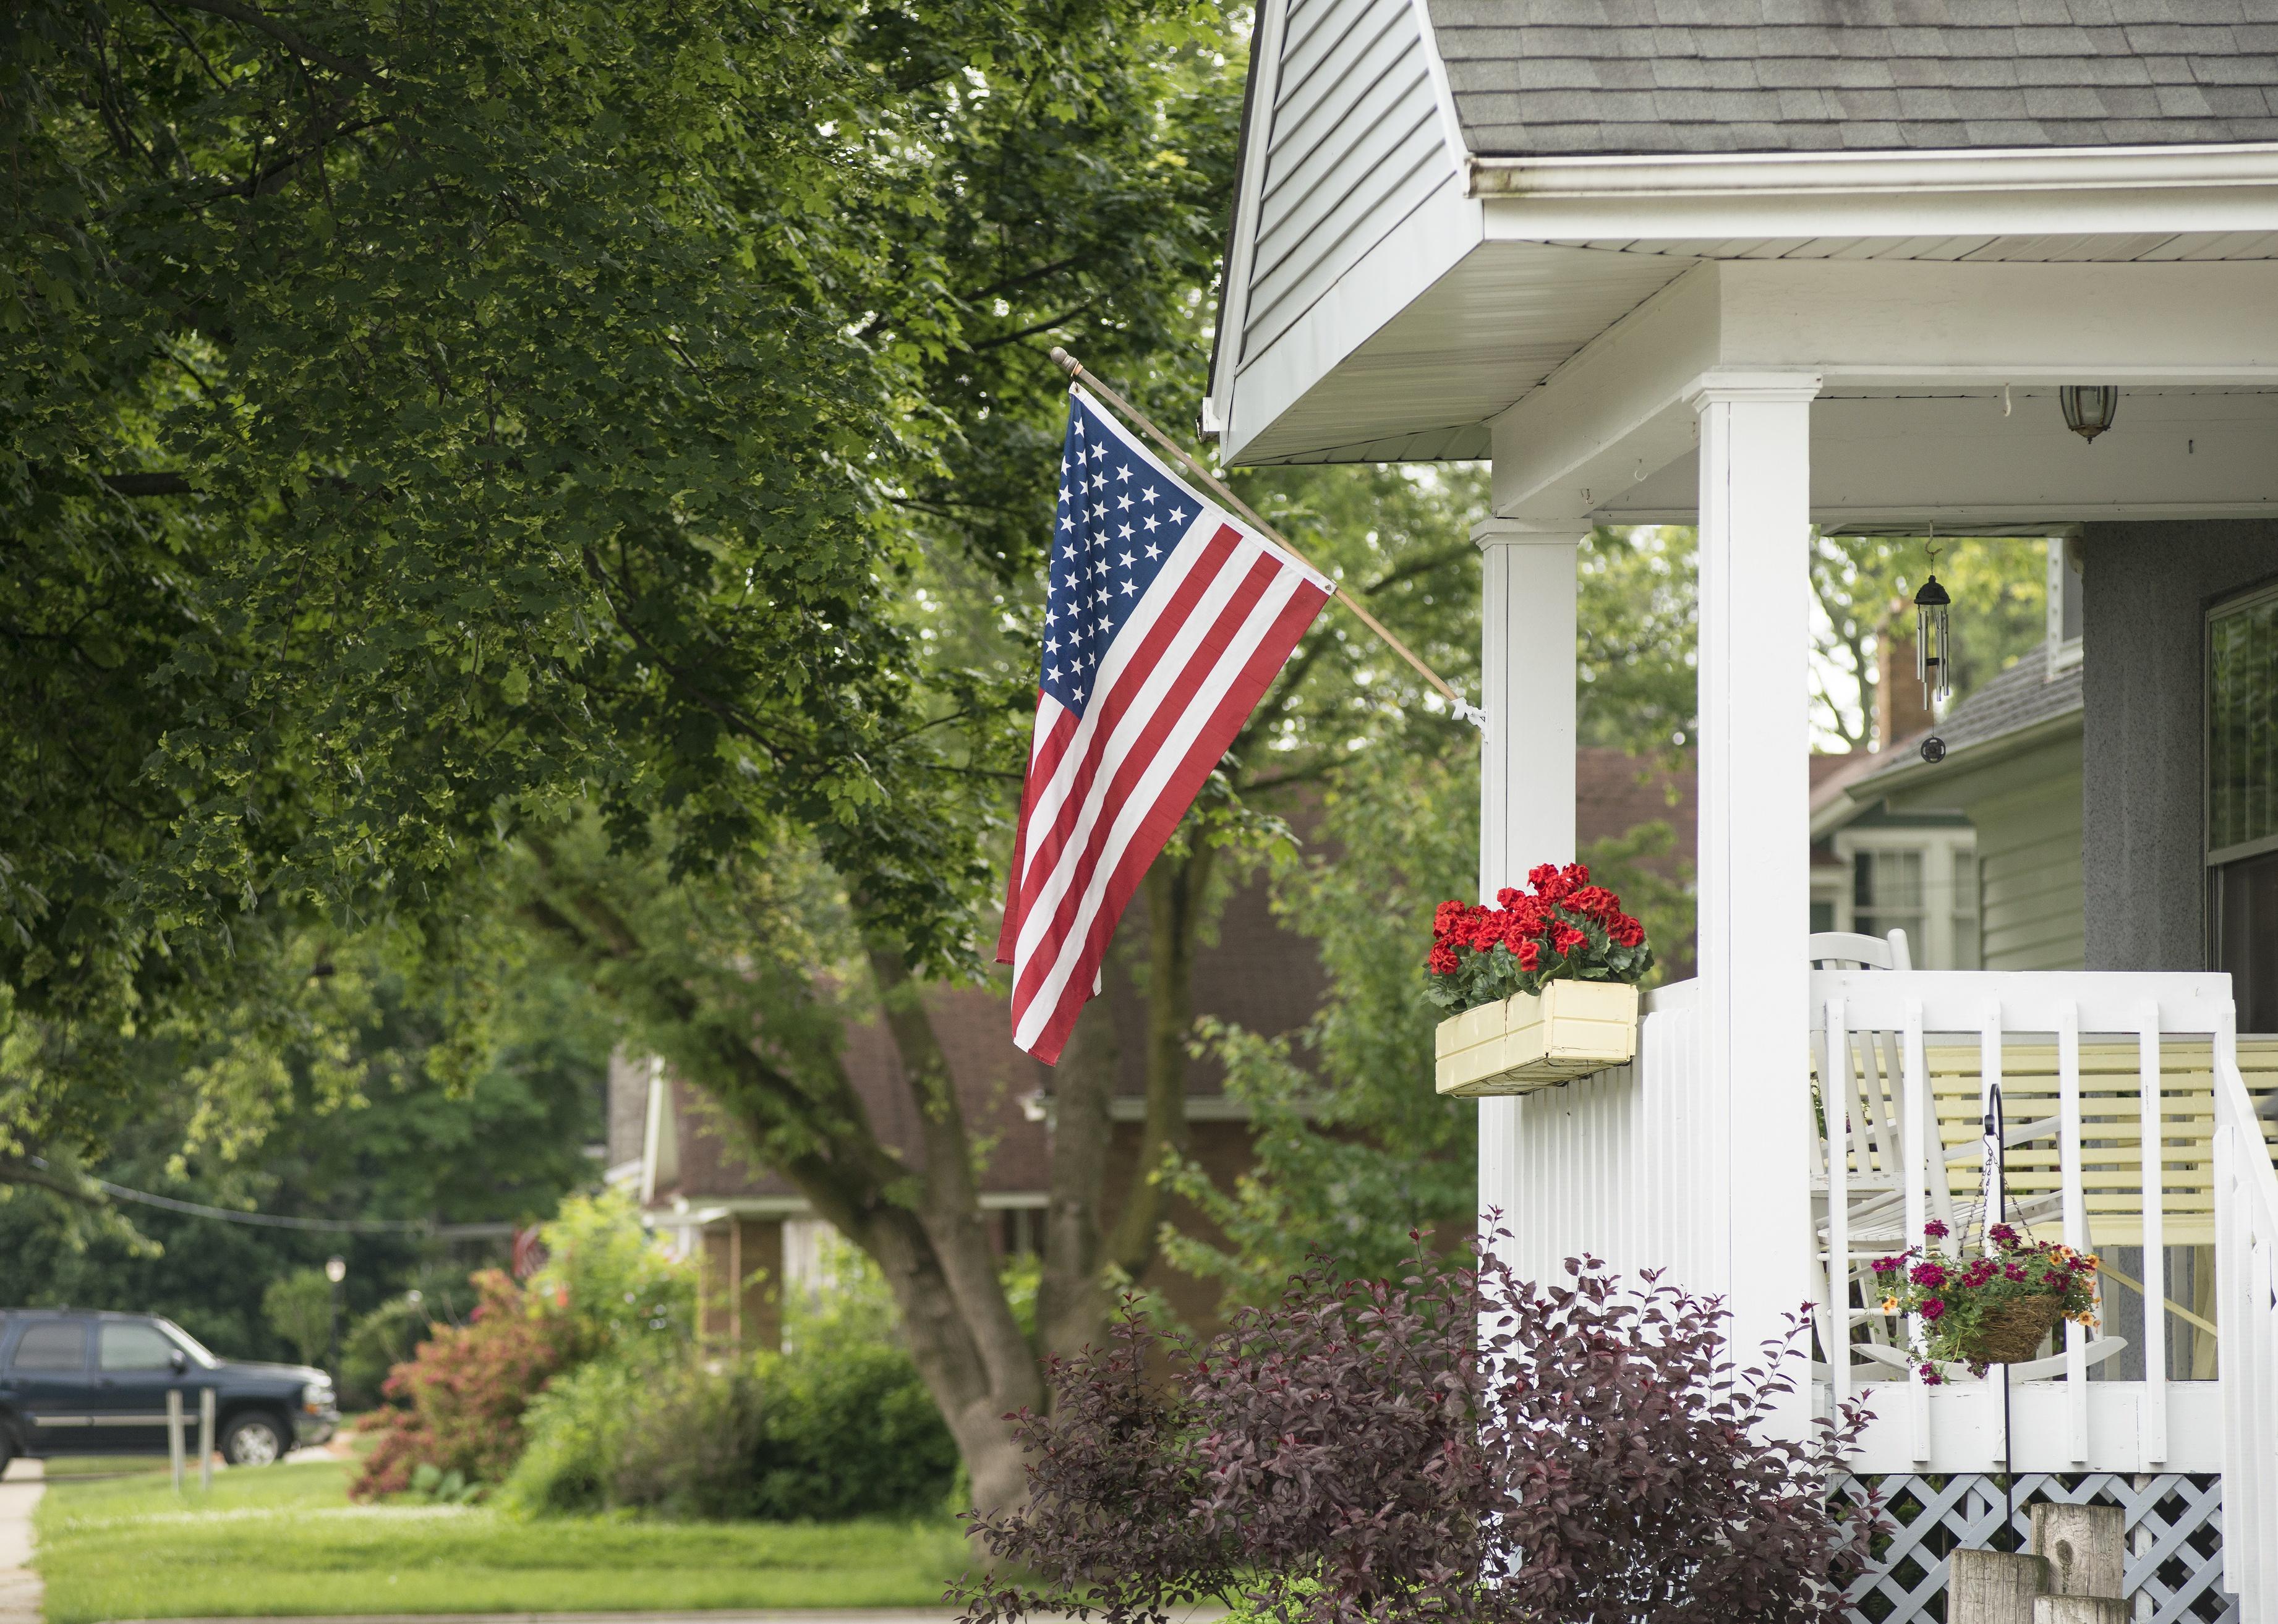 Residential home with an American flag on it